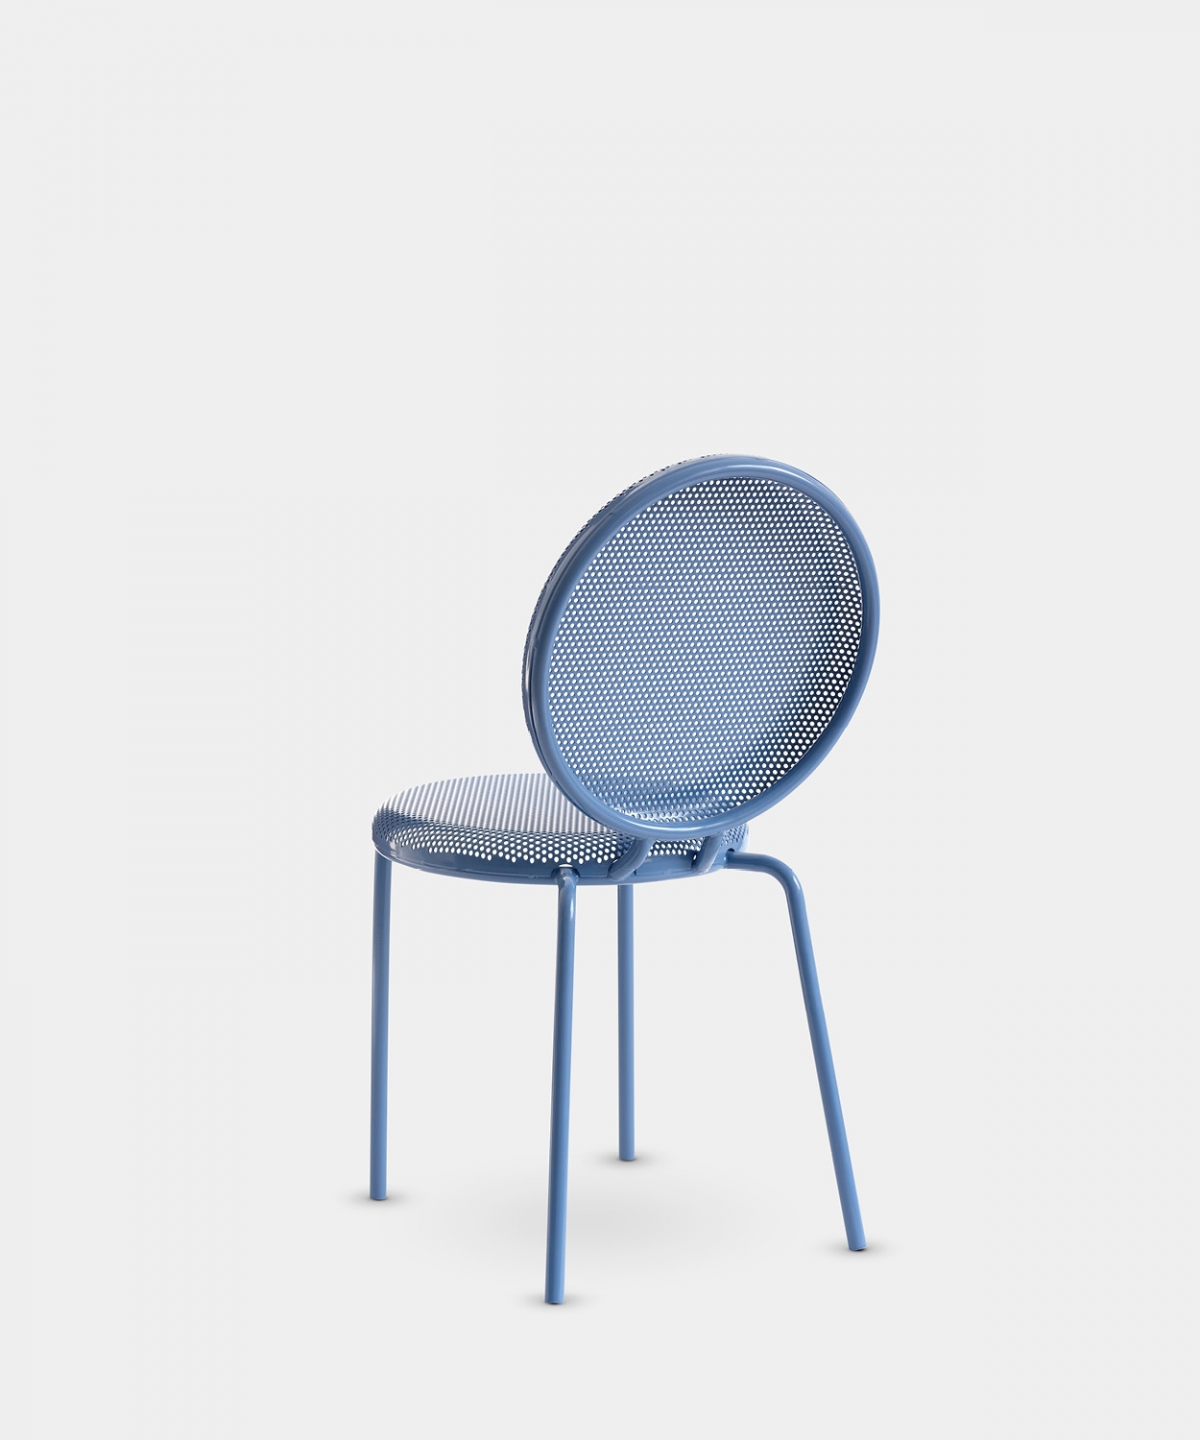 Dimma Chair by Alexander Lervik for Tingest